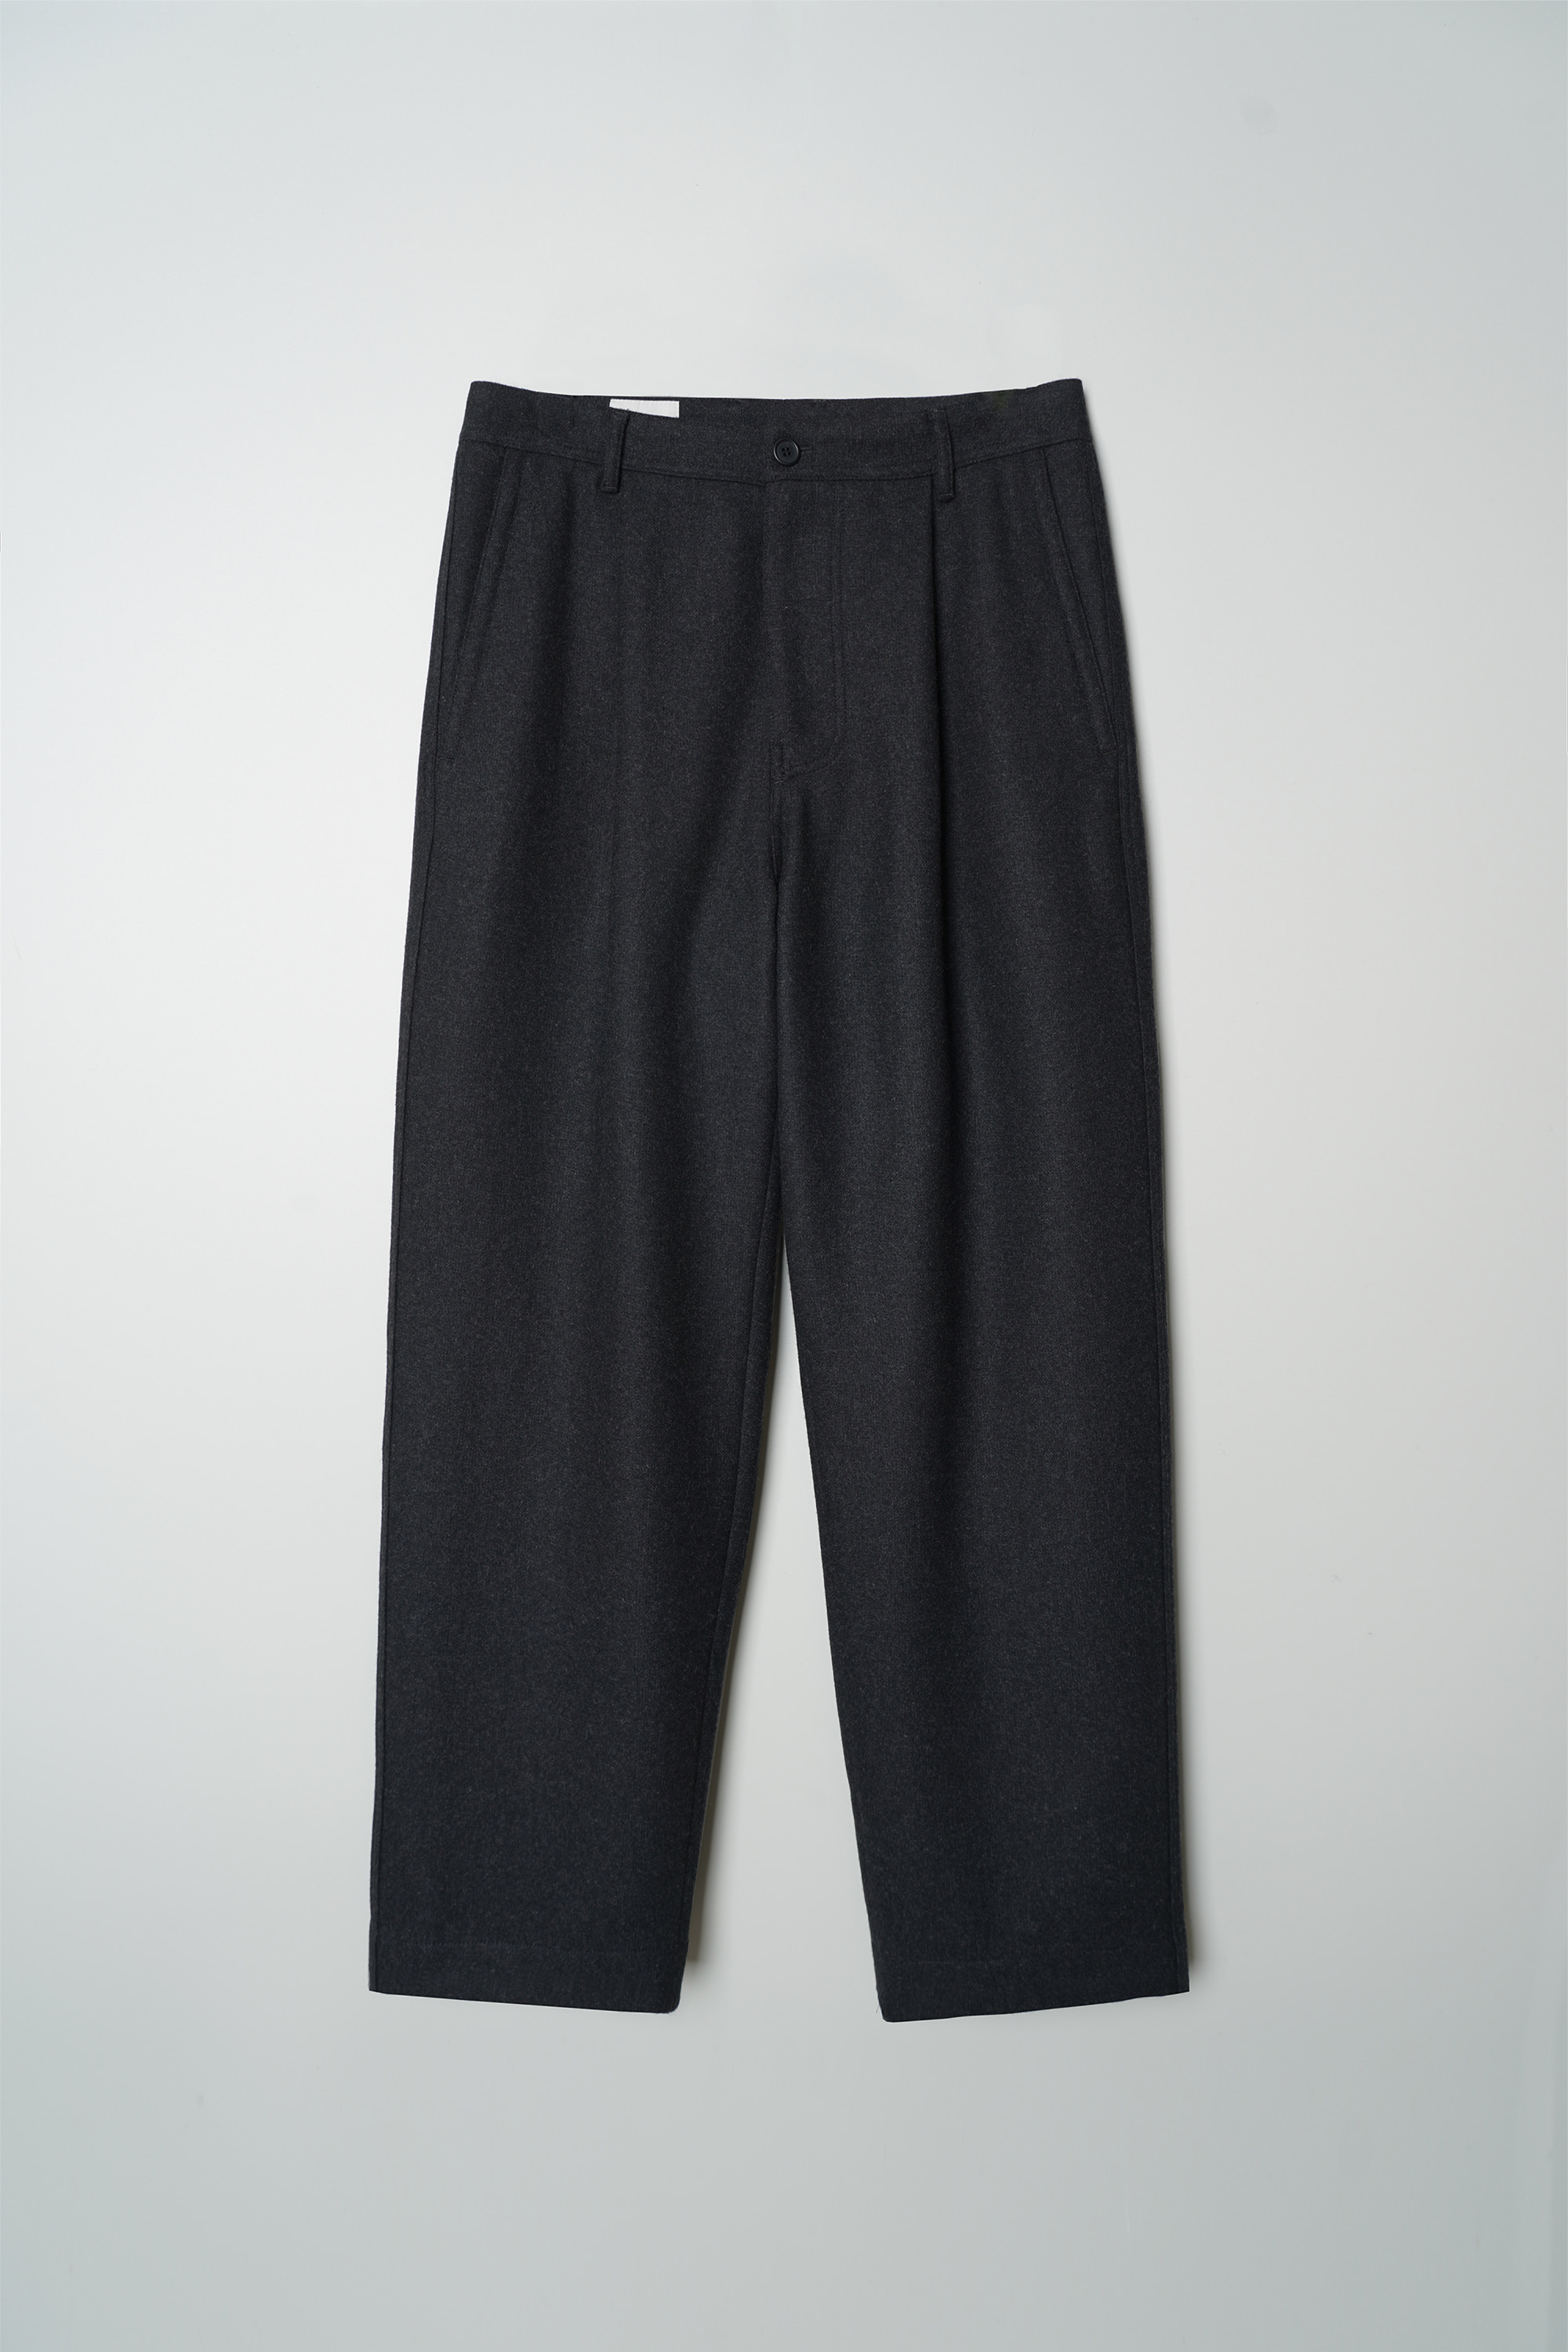 STRUCTURED WOOL PANTS - CHARCOAL